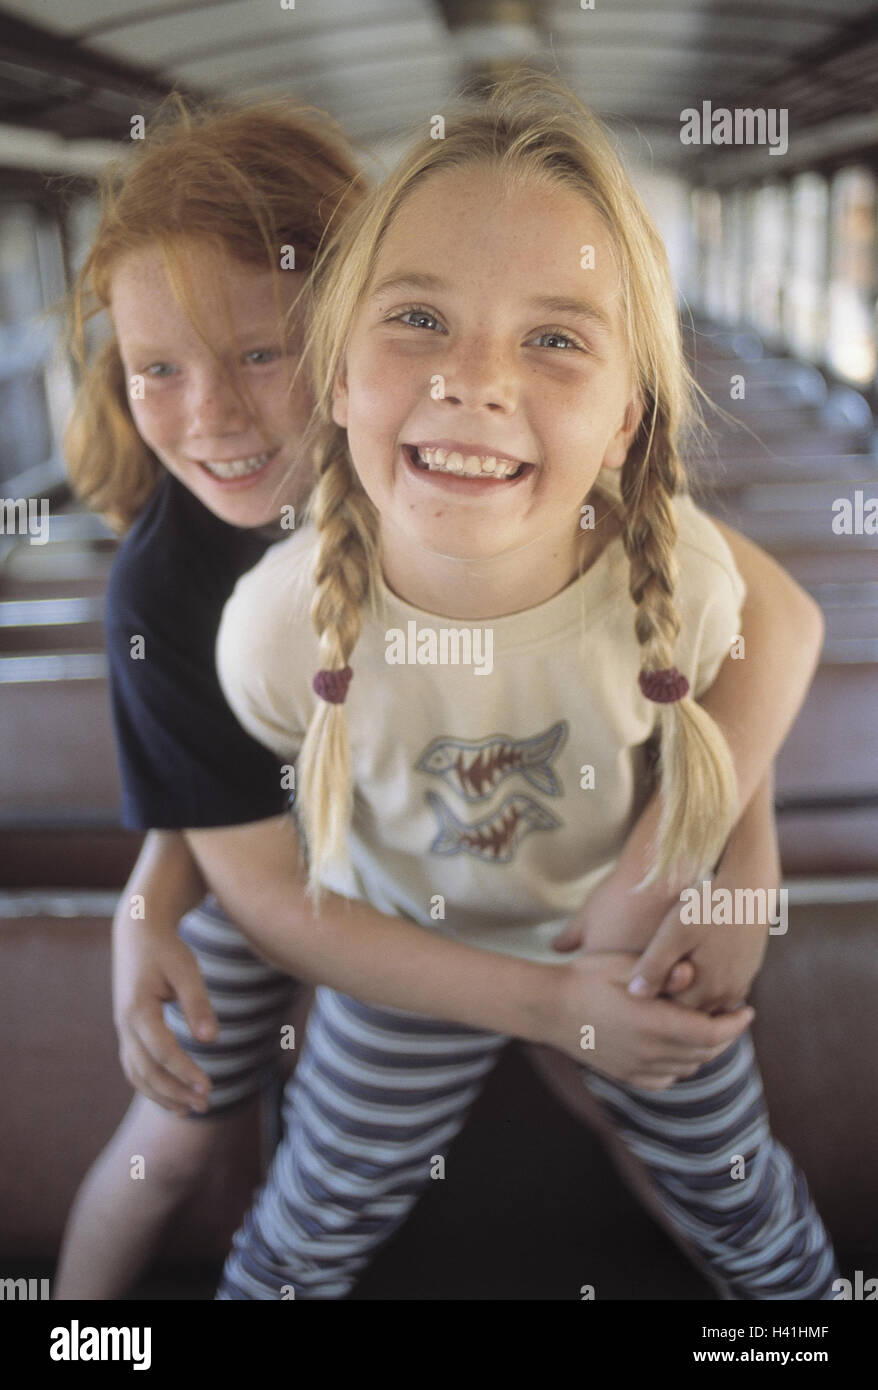 Train compartment, girl, happy, embrace, detail, inside, summer, vacation, holidays, leisure time, childhood, children, 9 years, fun, excursion, travel, train travel, train journey, trajectory, railway car, carriage, laugh, amuse funnily, joy, happy, expr Stock Photo